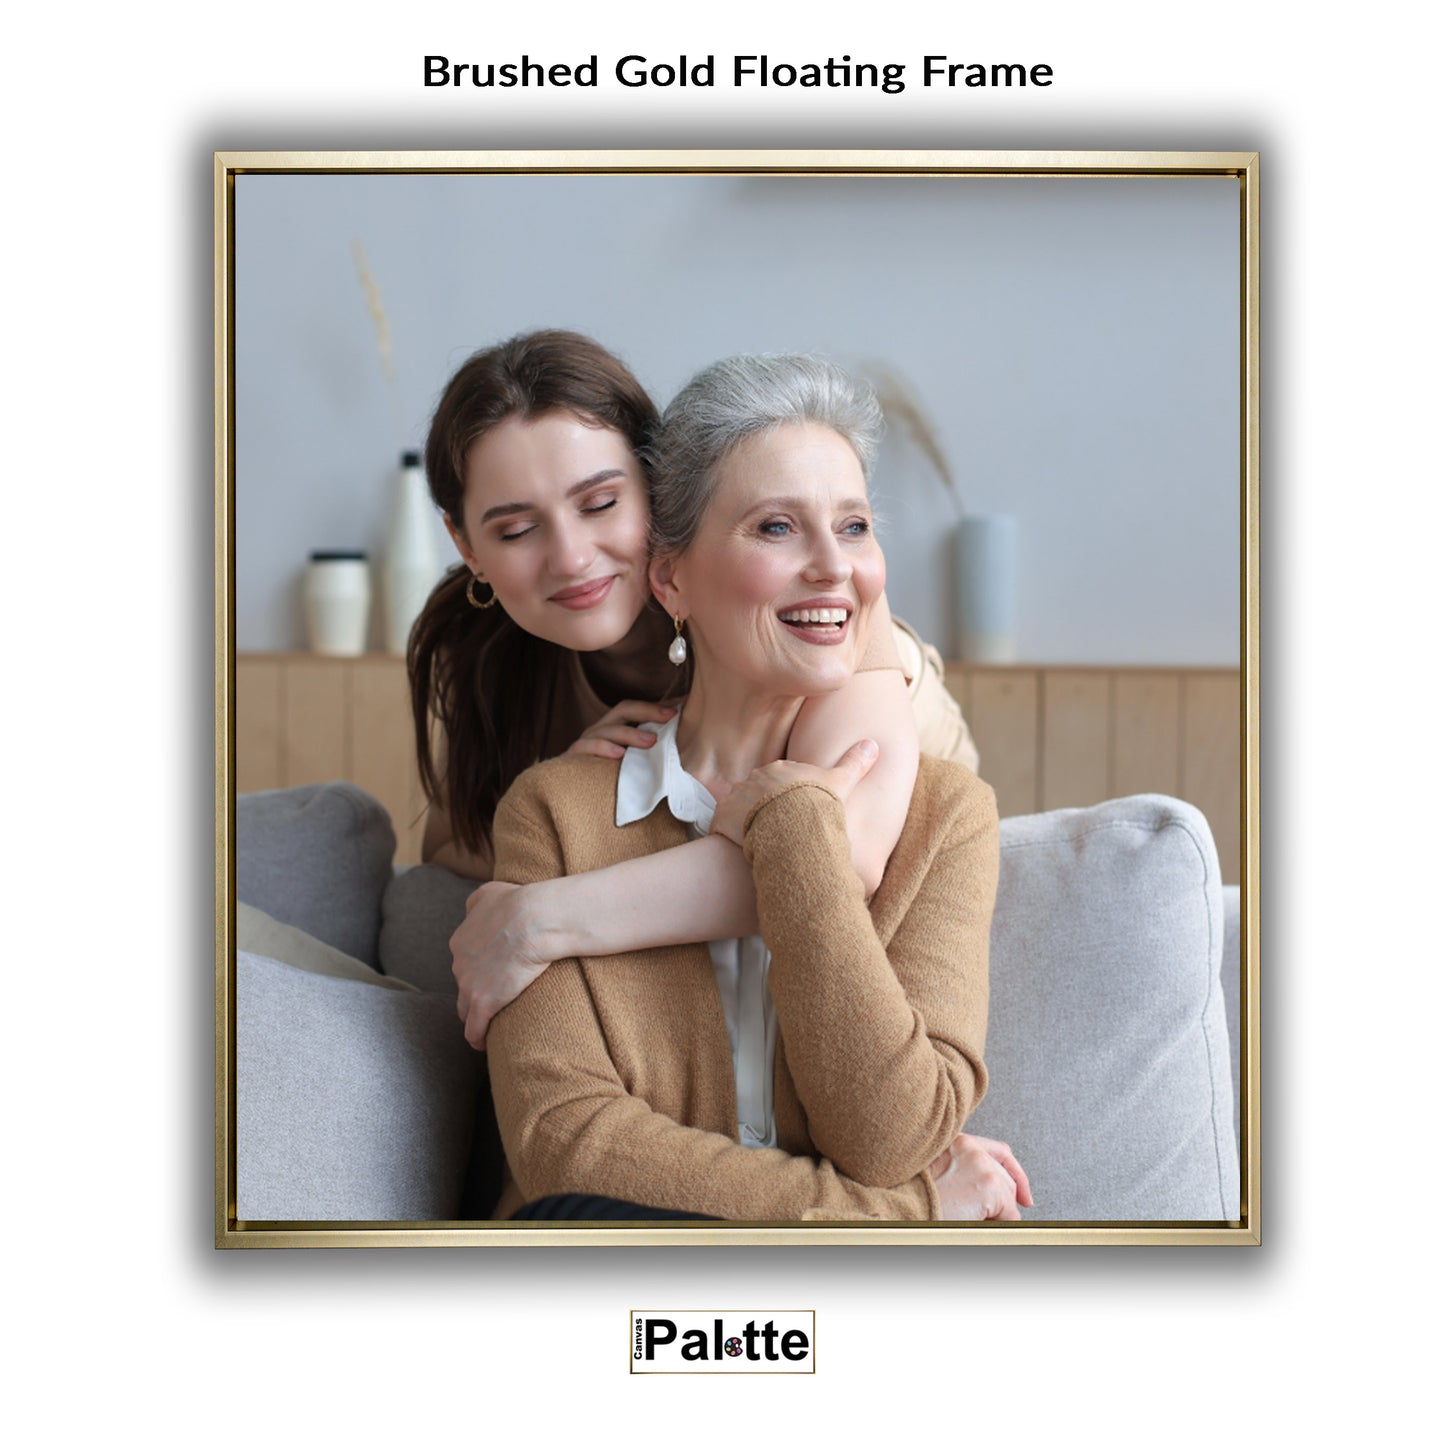 Example brushed gold floating frame for canvas printed at Canvas Palette